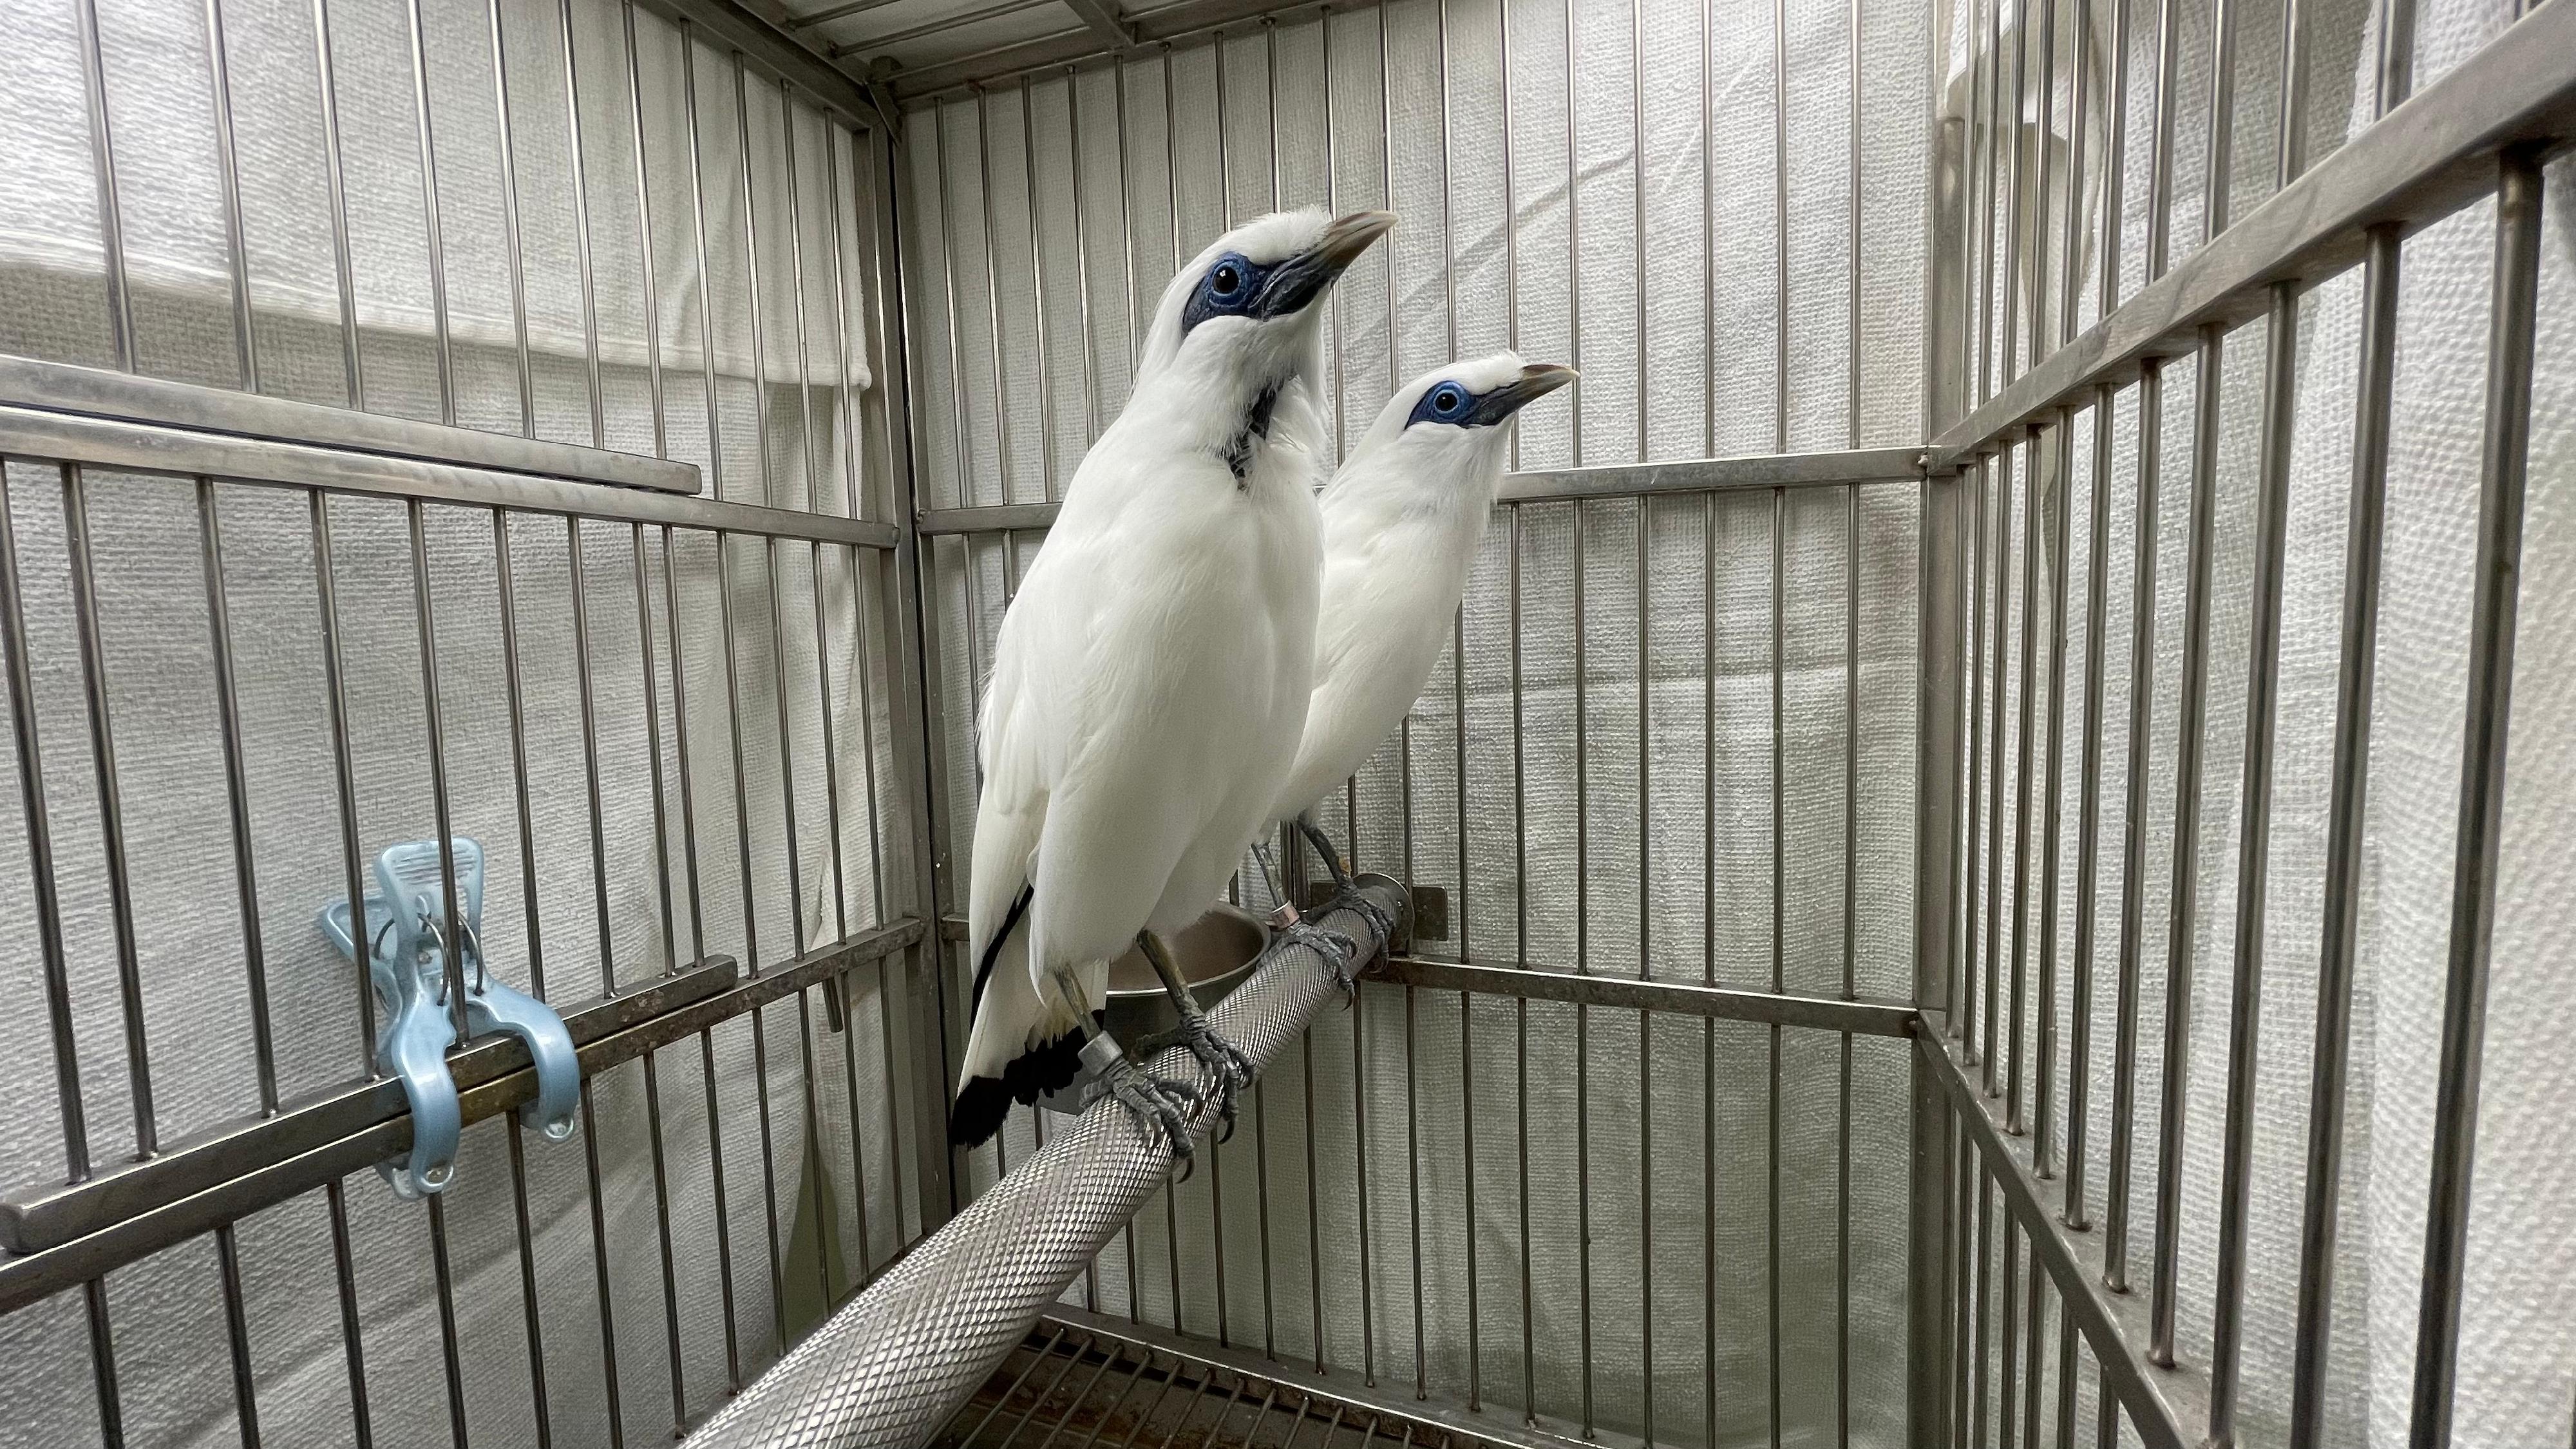 The Agriculture, Fisheries and Conservation Department (AFCD) seized two critically endangered birds suspected of being illegally traded during a test buy today (April 14). Photo shows the two Bali mynas concerned.